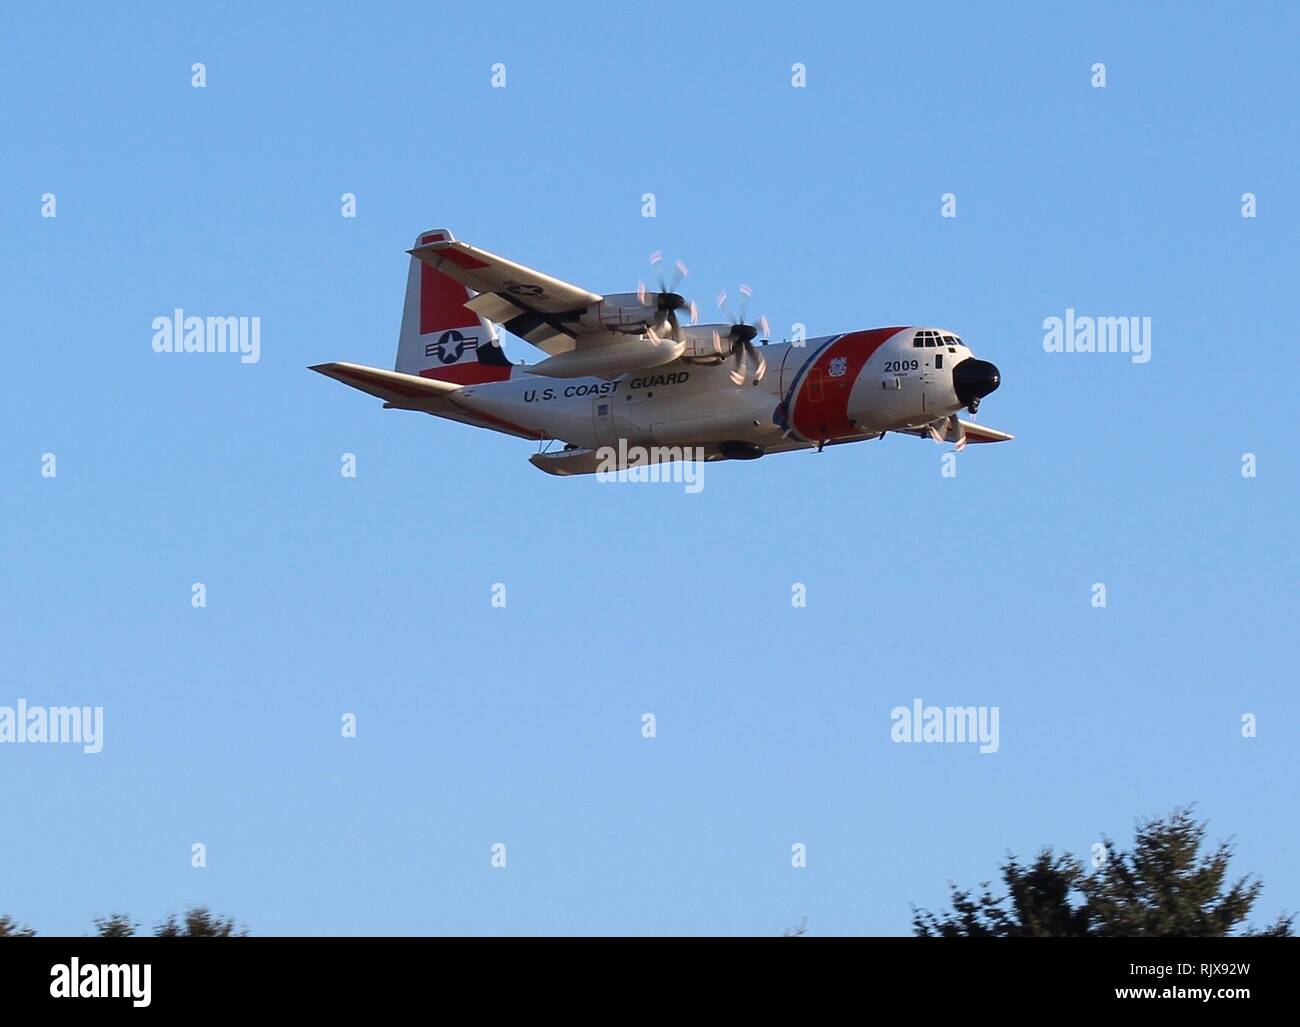 A Coast Guard Air Station Kodiak HC-130 Hercules aircrew performs drop training in Kodiak, Alaska, Feb. 7, 2019. Aircrews routinely conduct training flights to remain proficient for search and rescue cases. Courtesy photo by Annie Bowers. Stock Photo